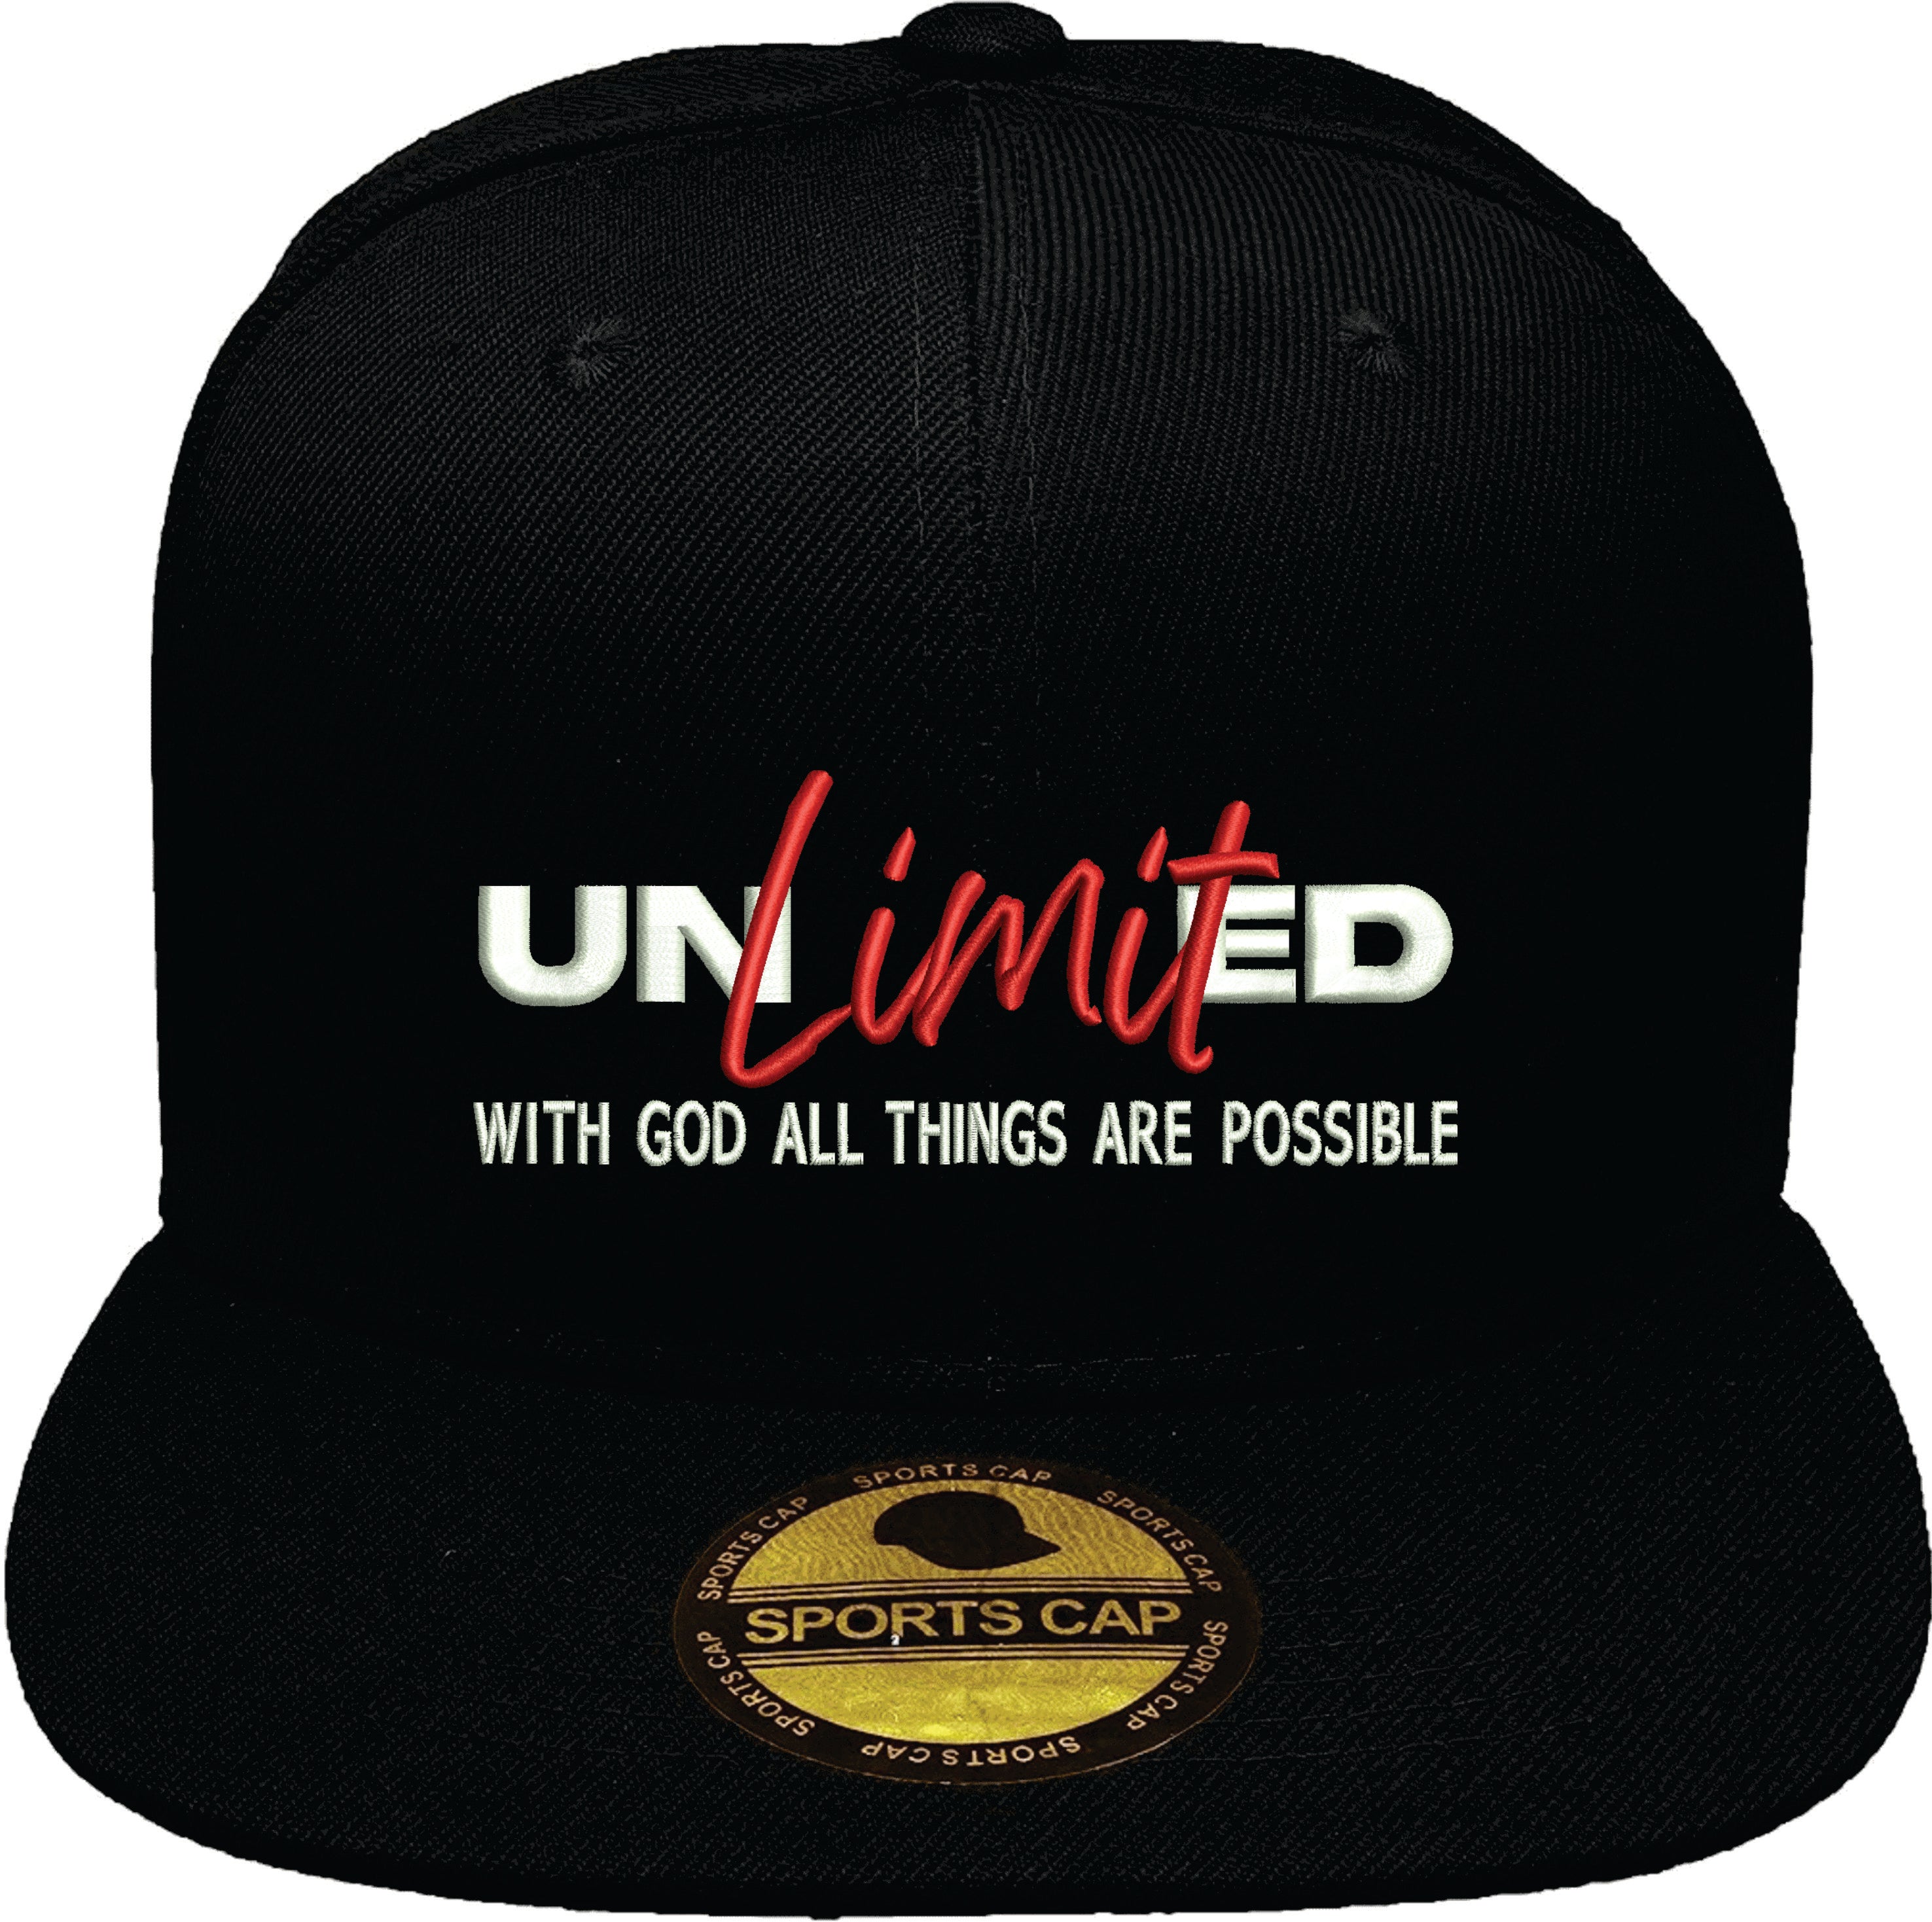 Unlimited - All Things Are Possible 3D Puff cap